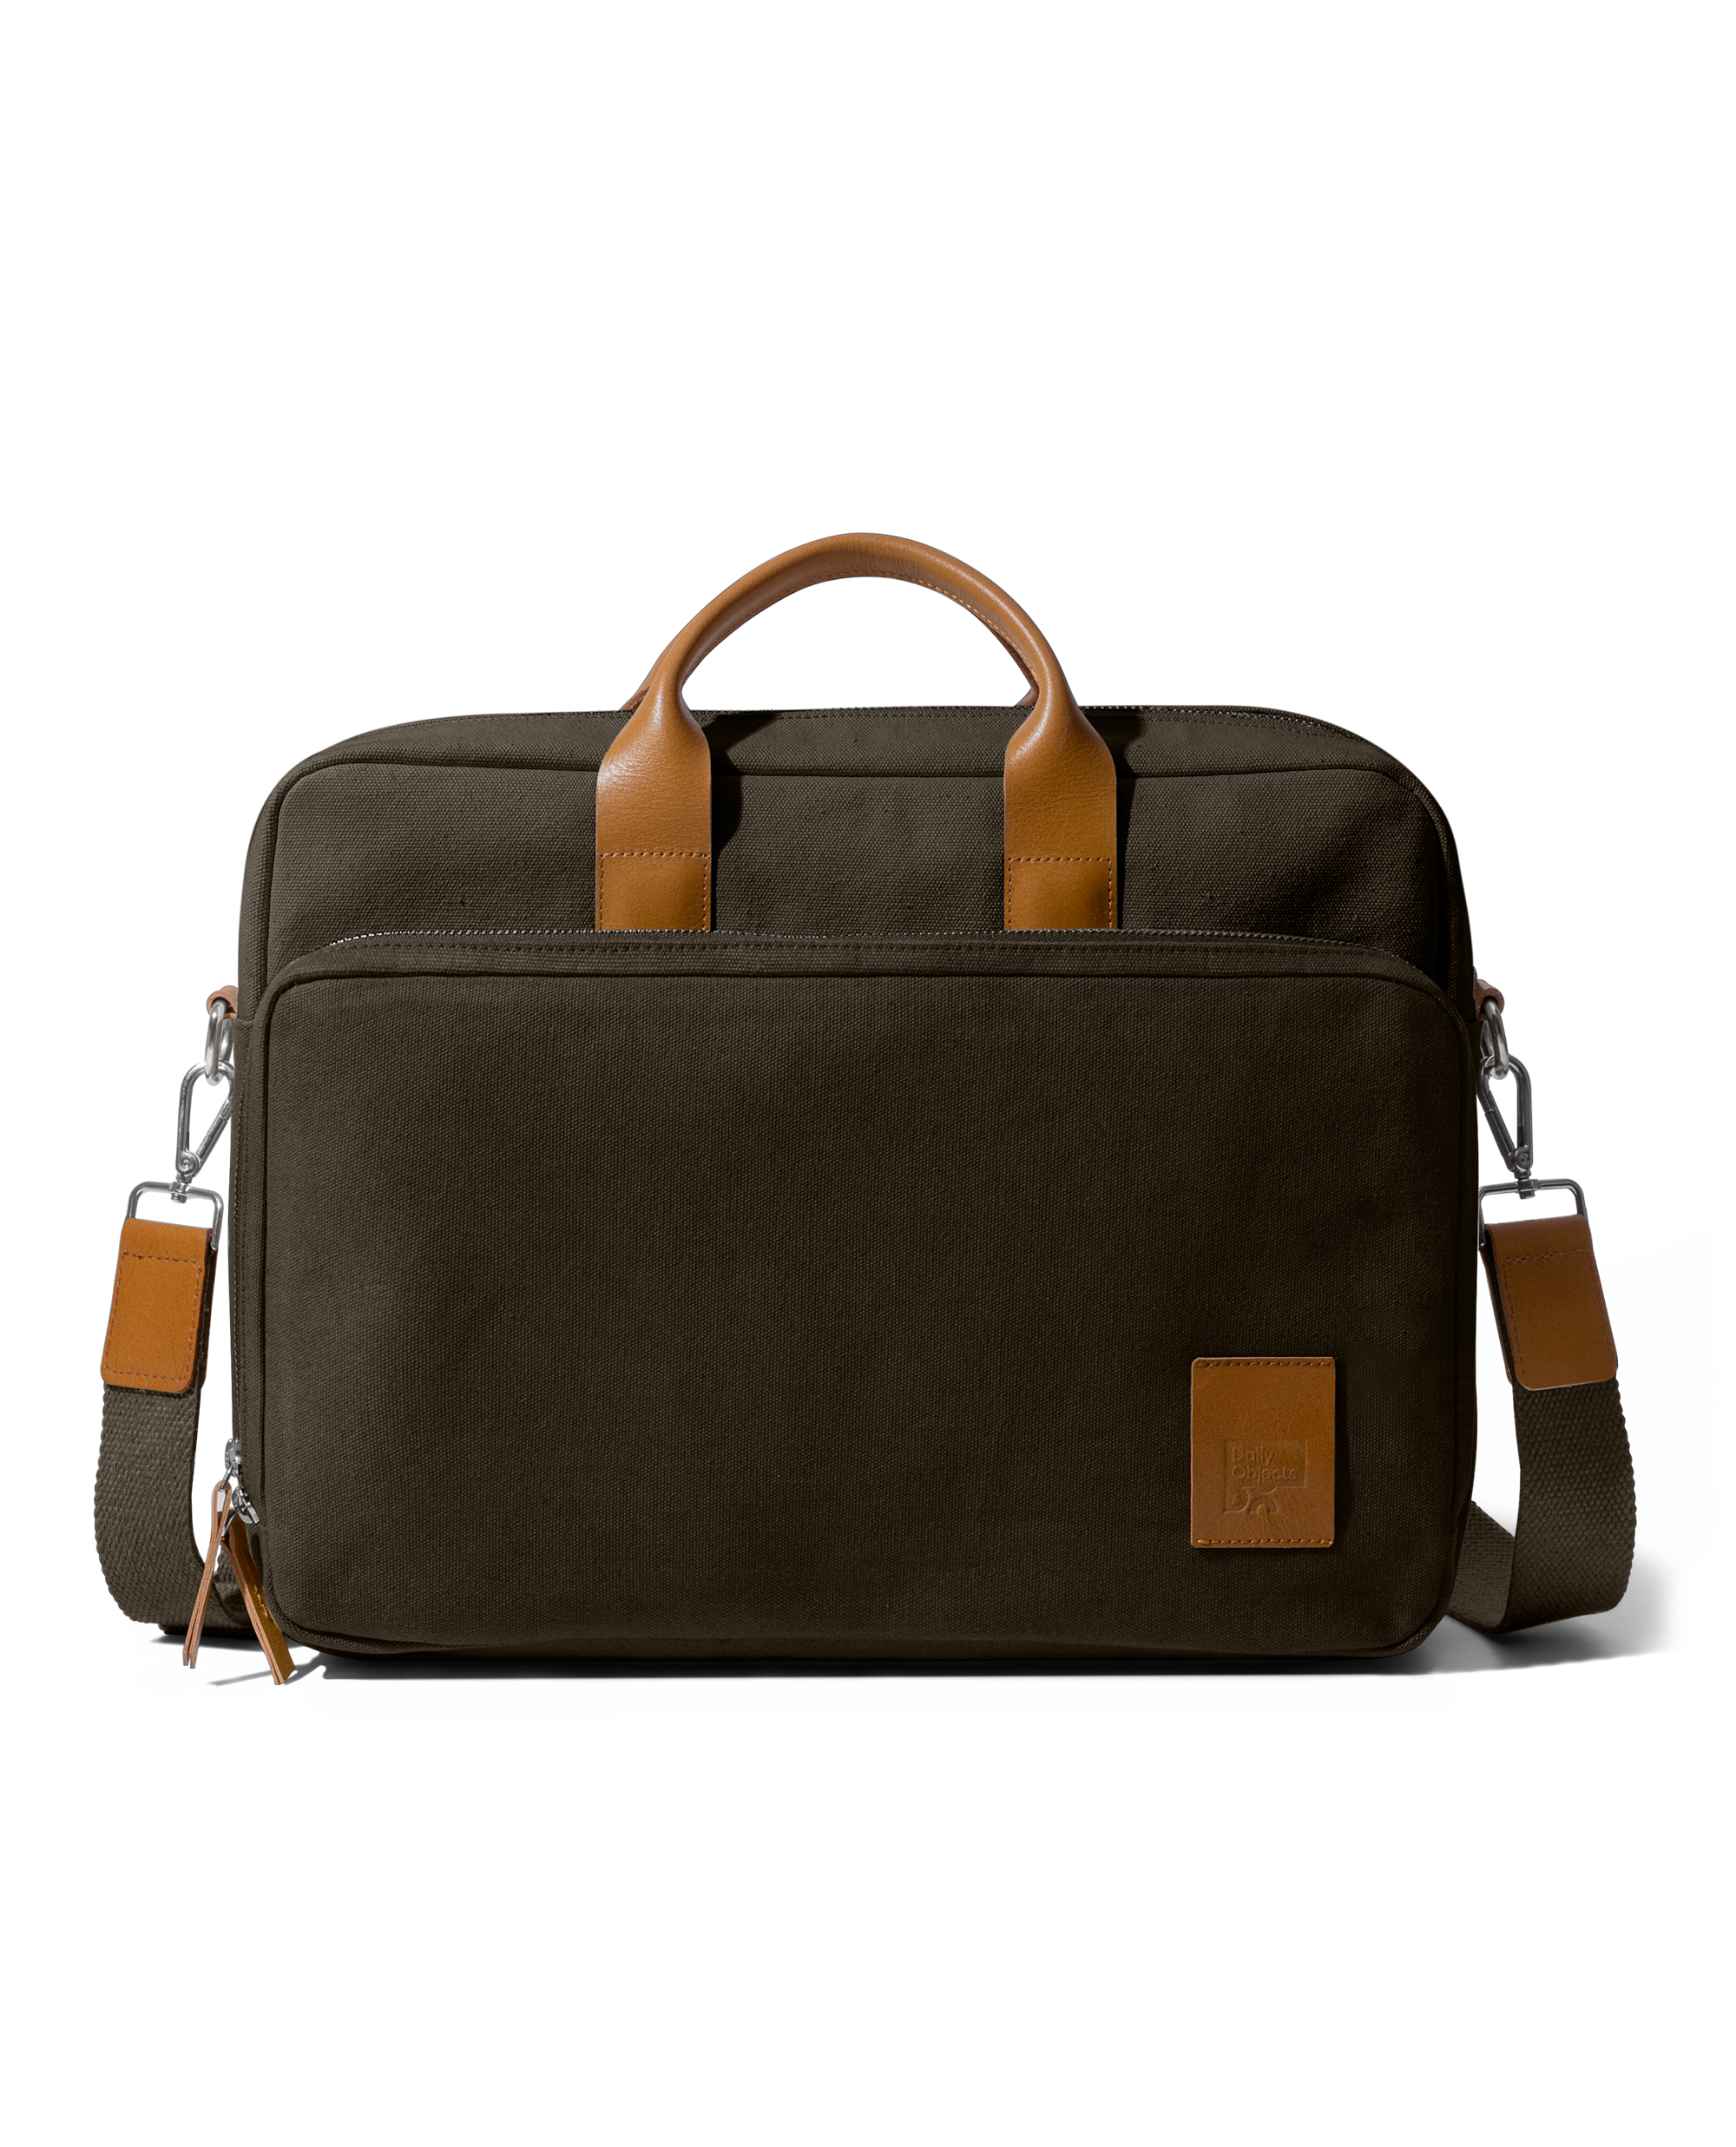 Amazon.com: Messenger Bags - $100 To $200 / Men / Messenger Bags / Luggage  & Travel Gear: Clothing, Shoes & Jewelry